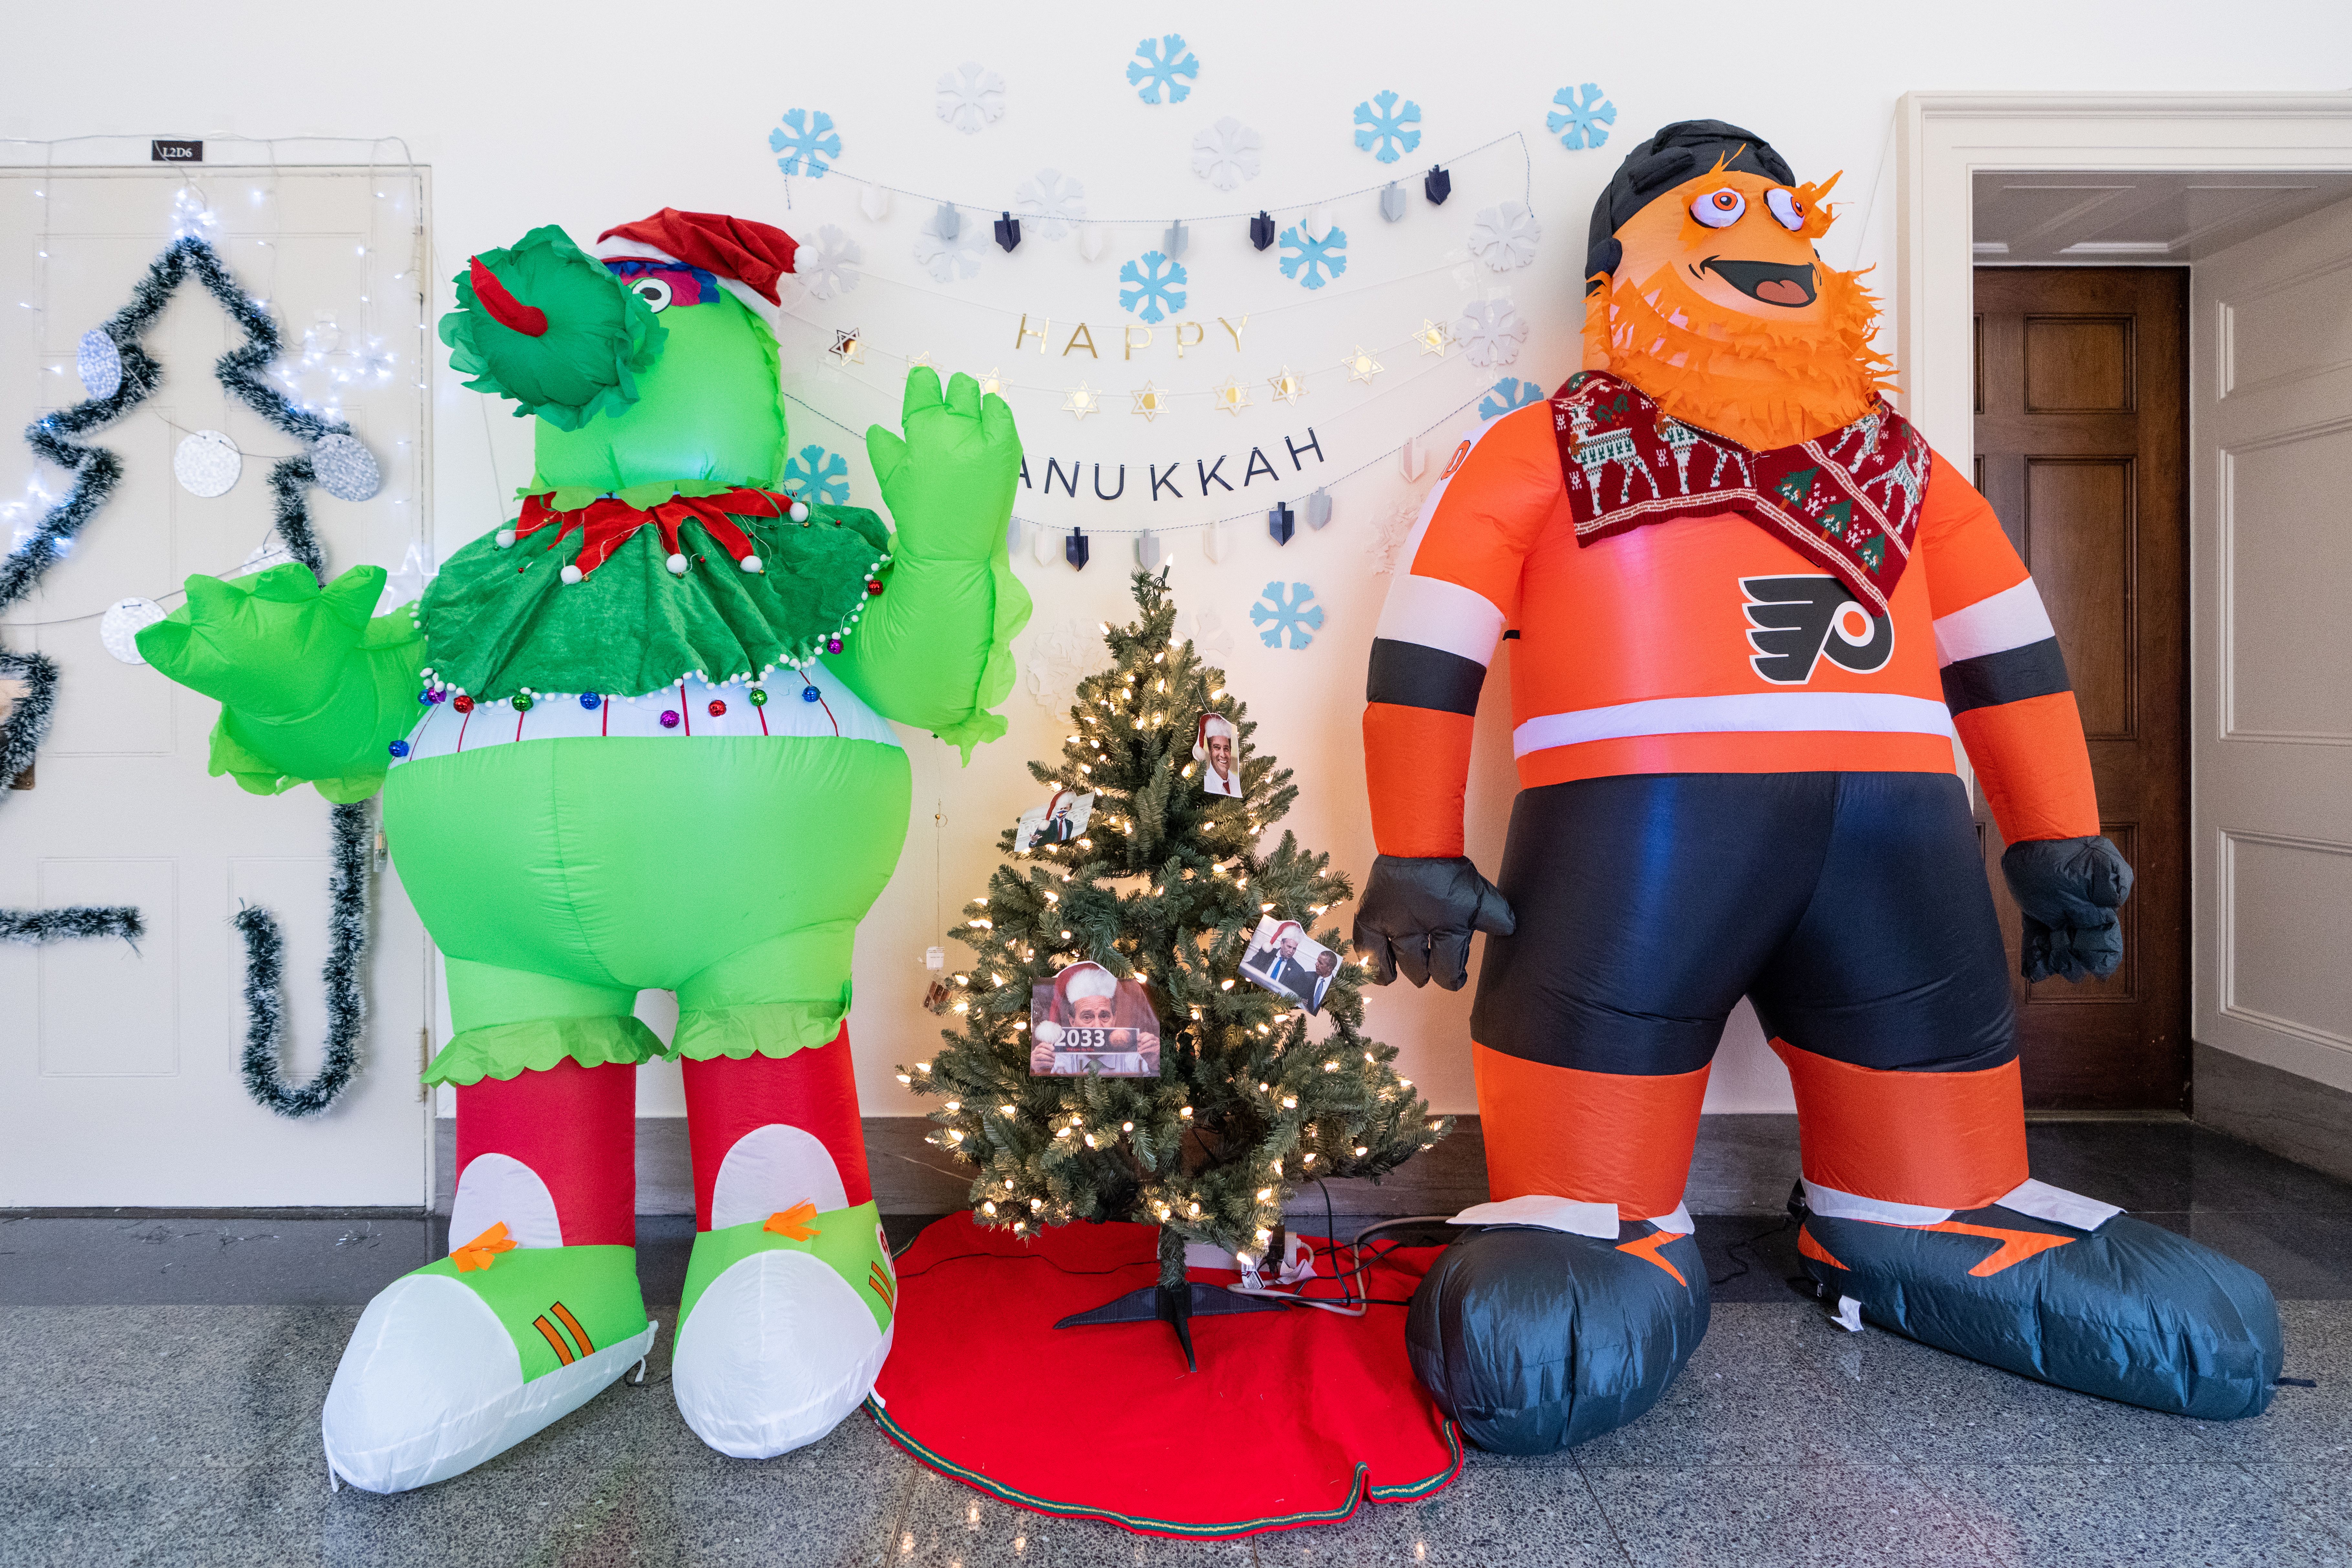 Philly sports mascots serve as Hanukkah and Christmas decorations in the hallway in front of U.S. Rep. Mary Gay Scanlon's office in Congress.